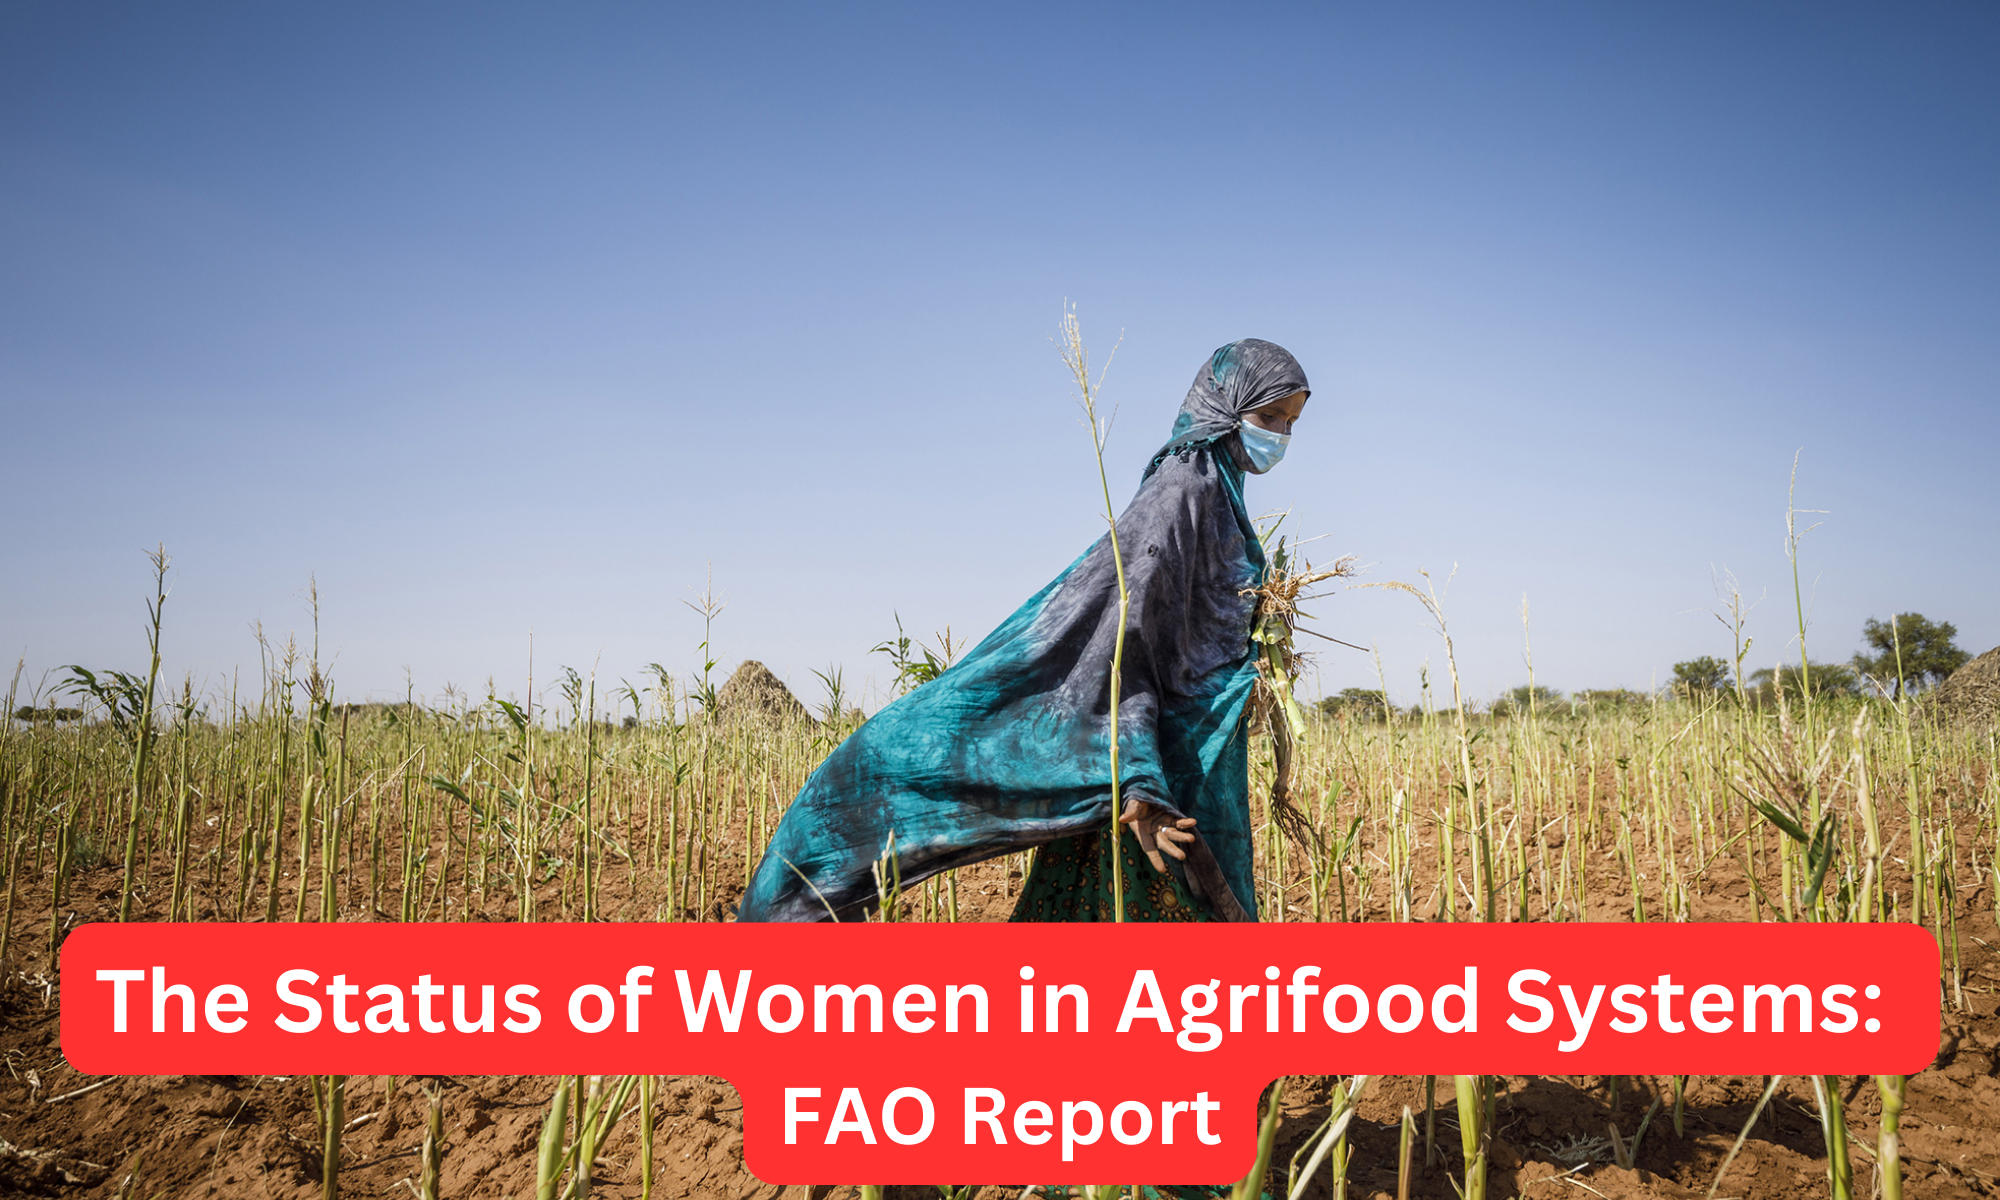 FAO Report on The Status of Women in Agrifood Systems_50.1